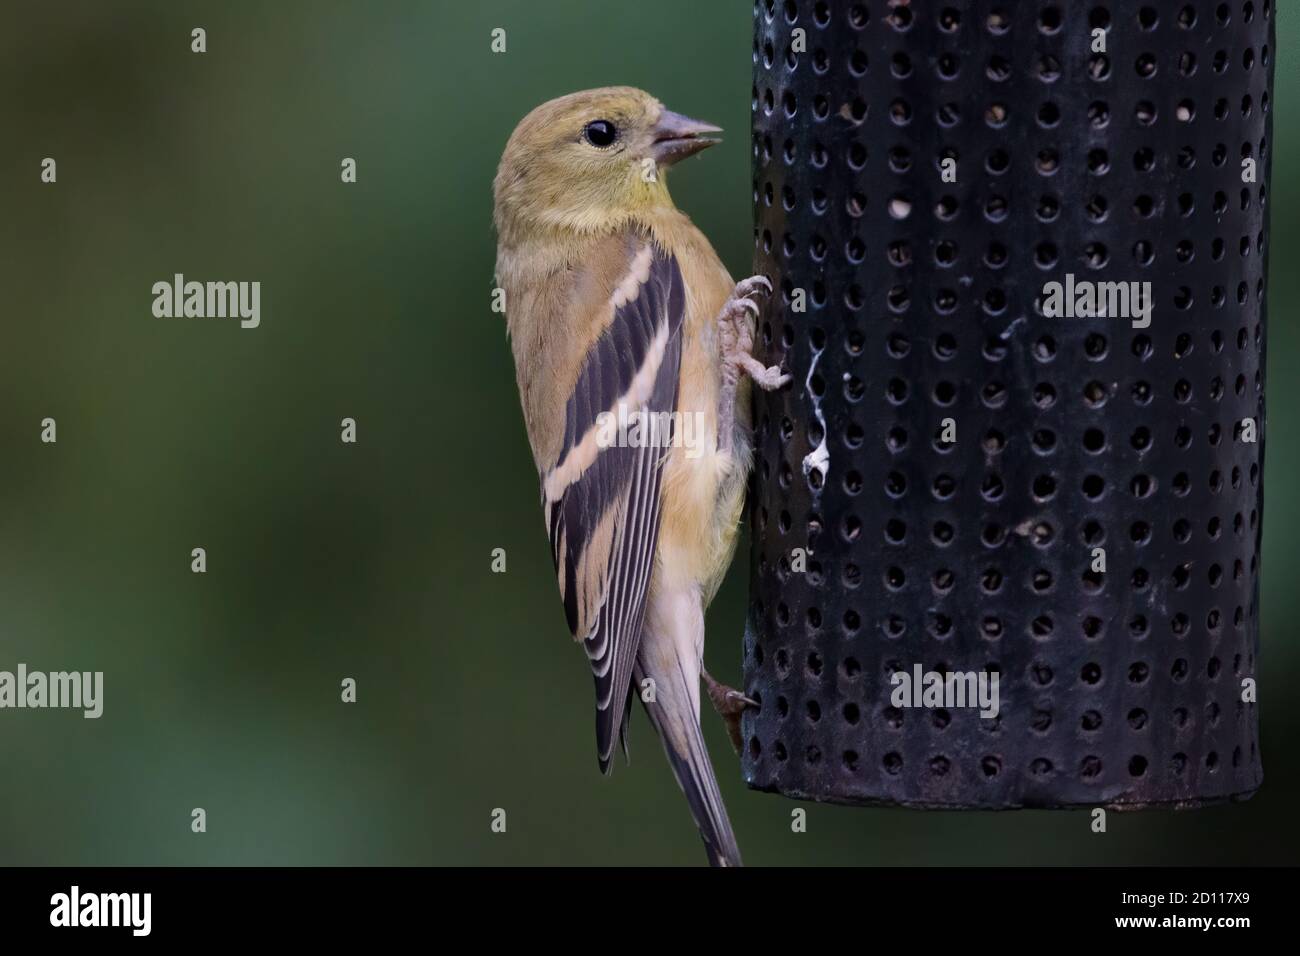 American goldfinch (Spinus tristis) is a granivore, and often found in residental areas, attracted by bird feeders. They have benefitted from human pr Stock Photo